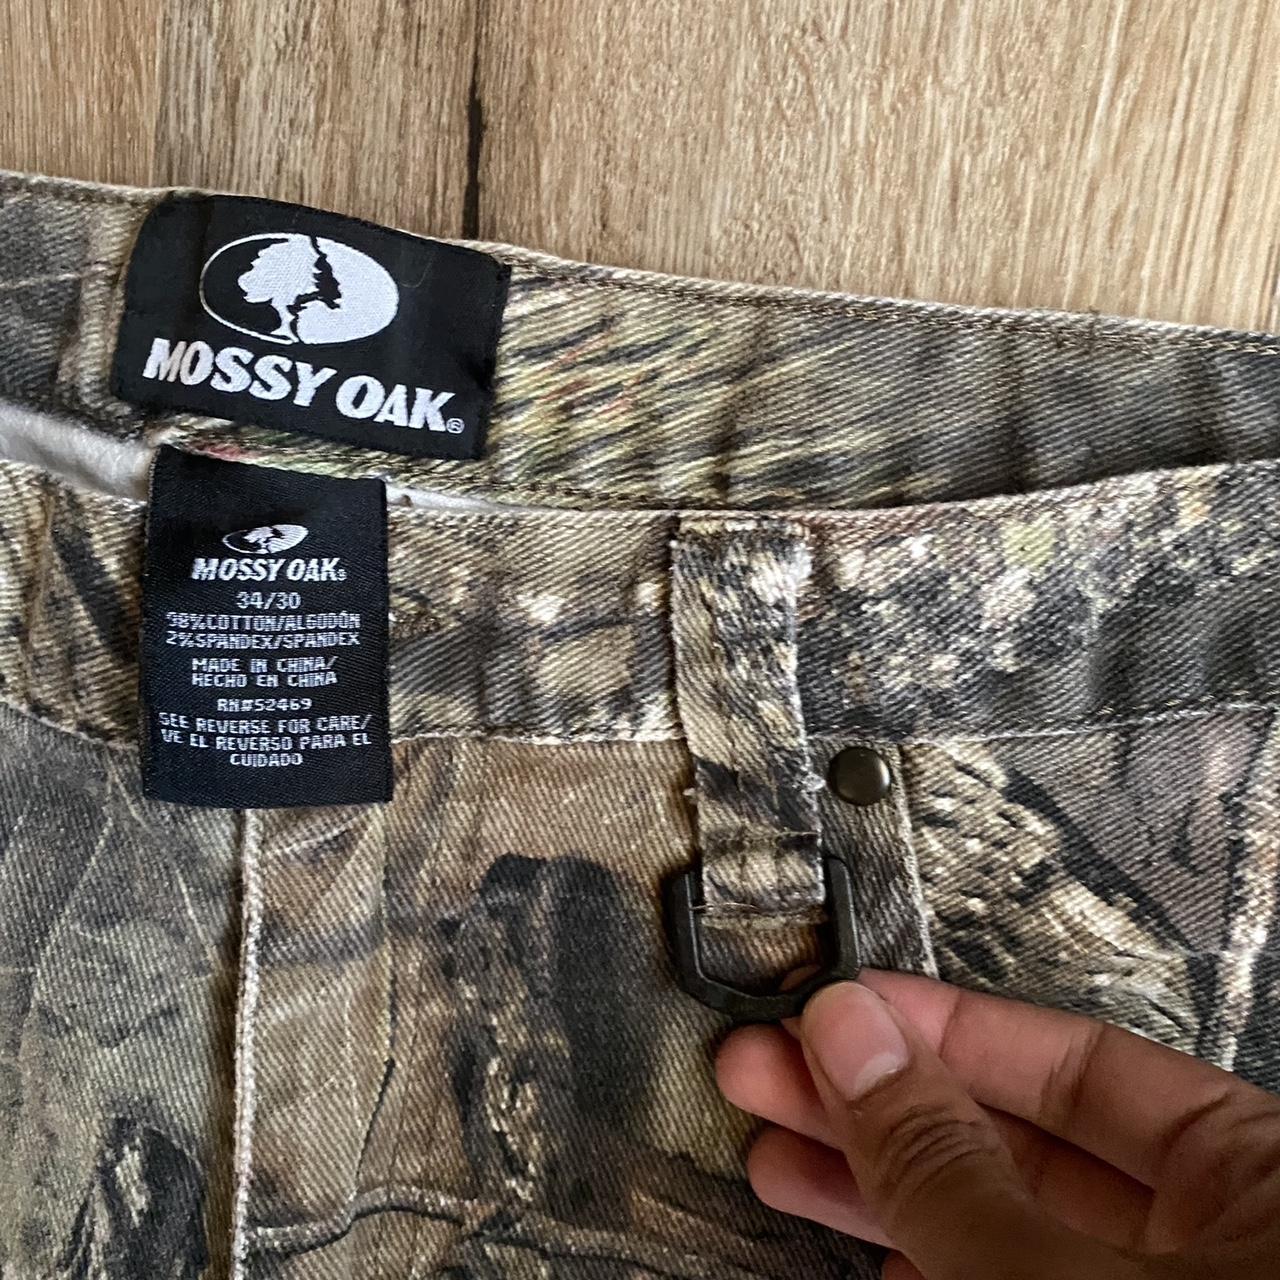 MOSSY OAK CAMO PANTS IN A SIZE 34x30 THIS IS THE... - Depop